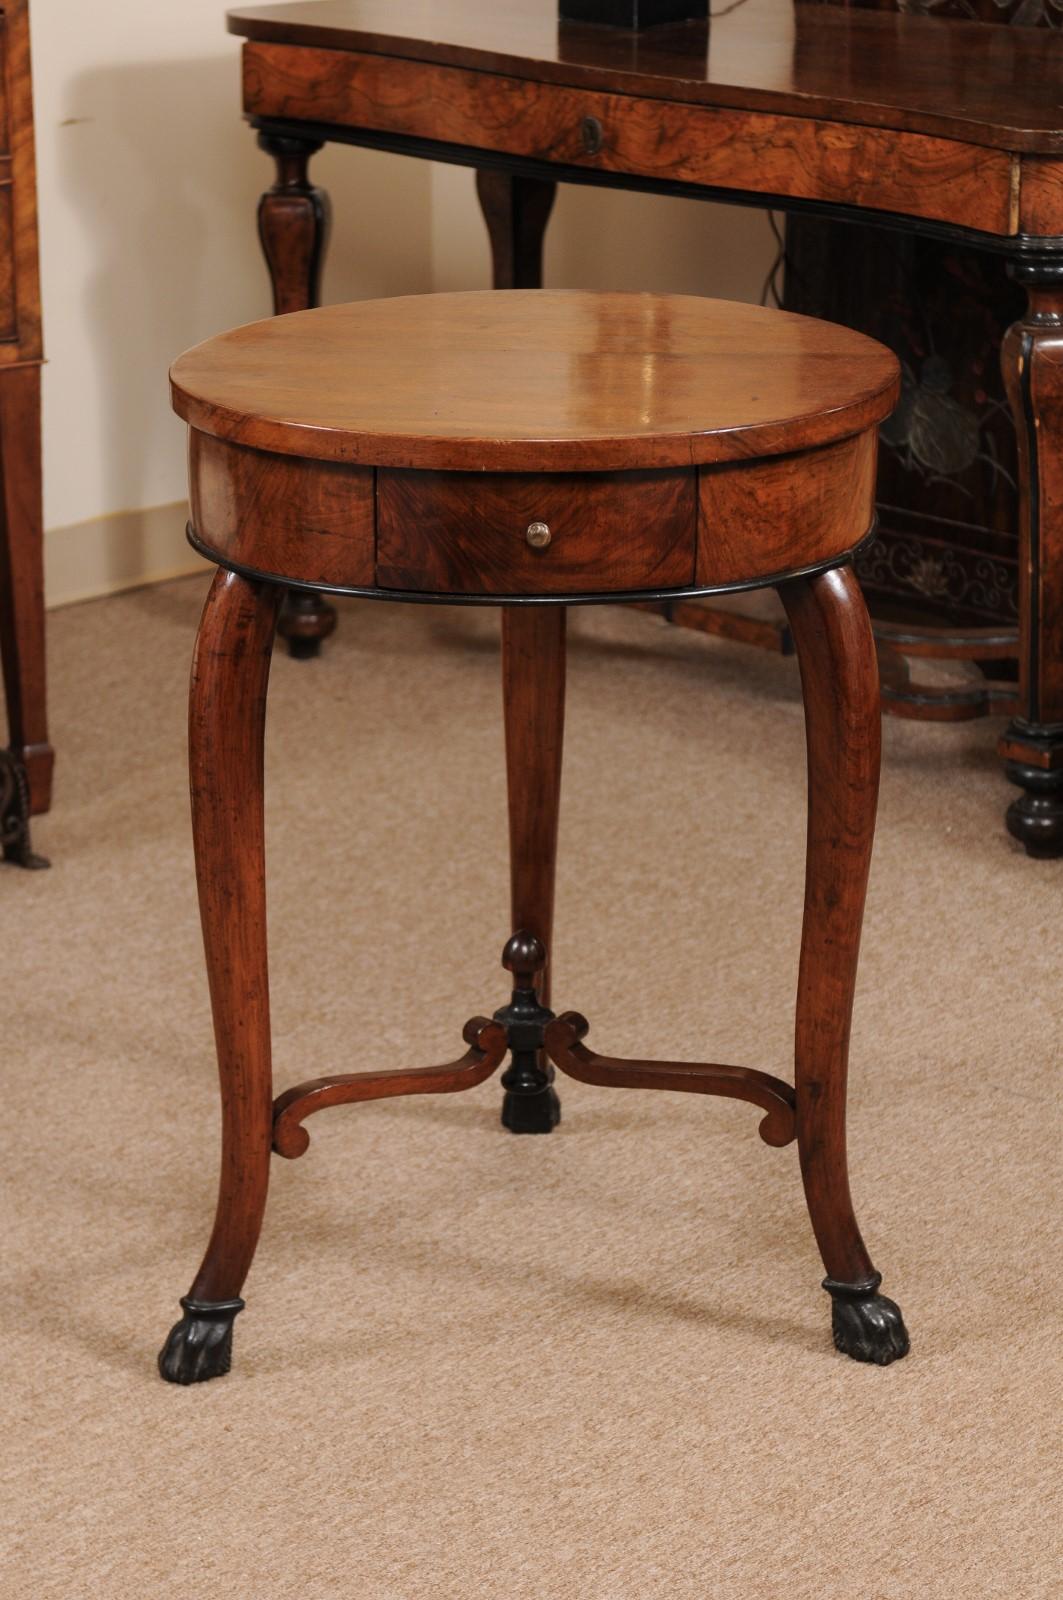 The early 19th century Italian walnut gueridon with ebonized detail, cross-stretcher and carved paw feet.